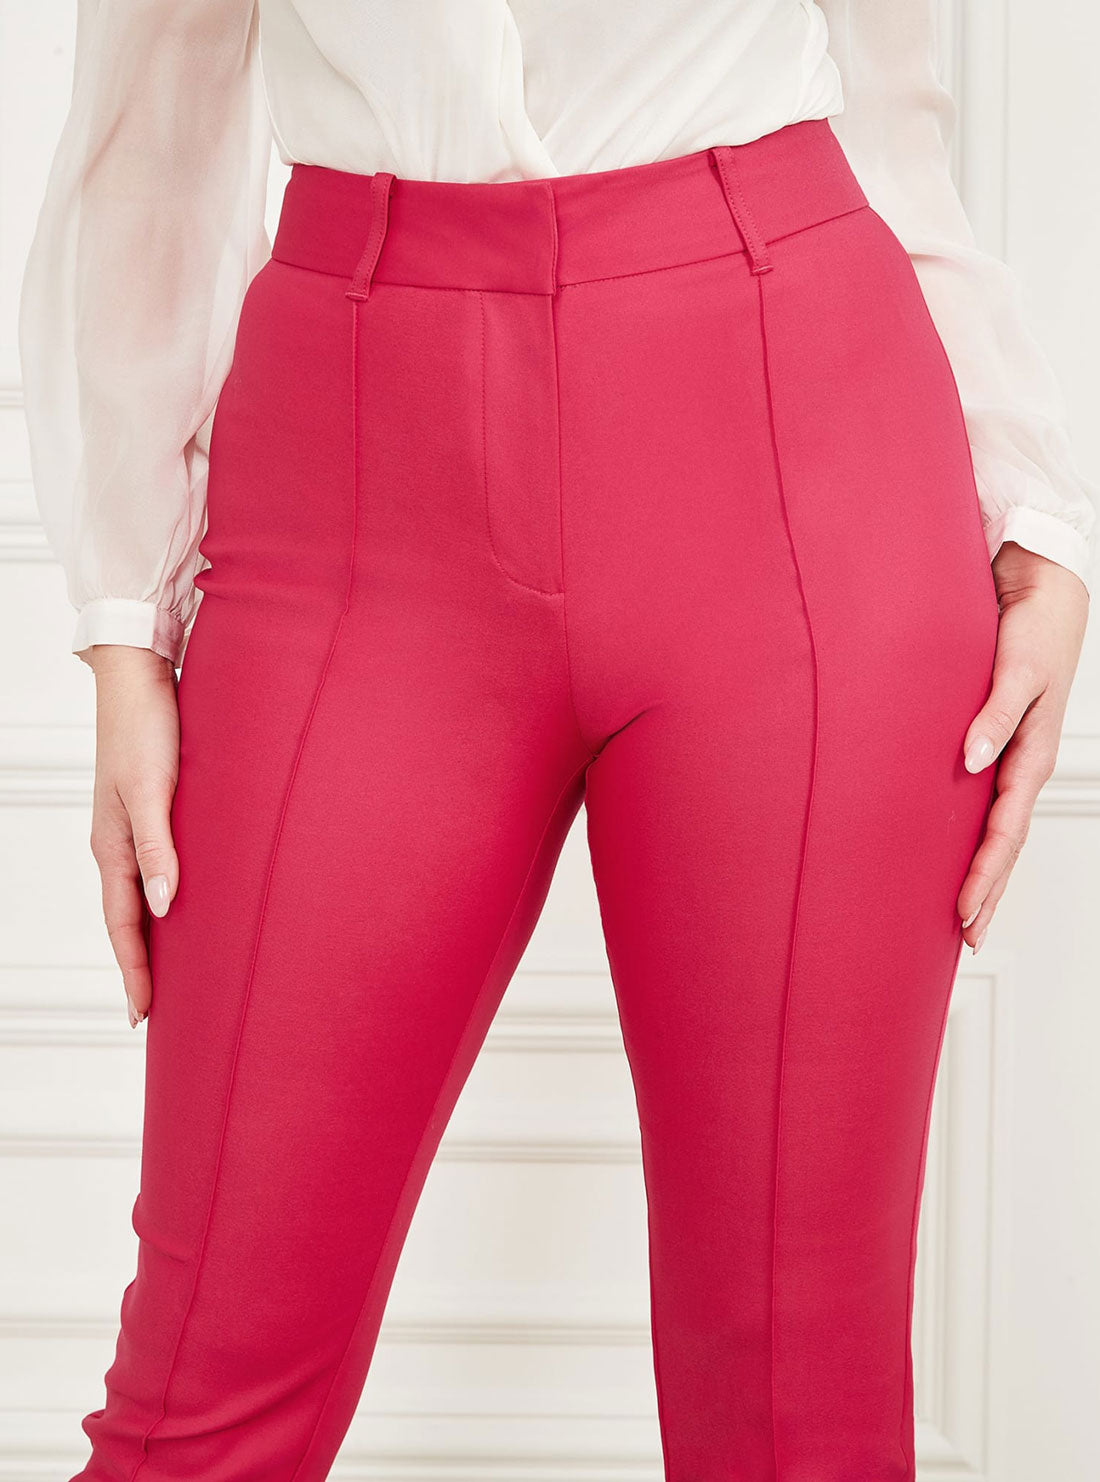 Marciano Pink Franca Chino High-Rise Pants